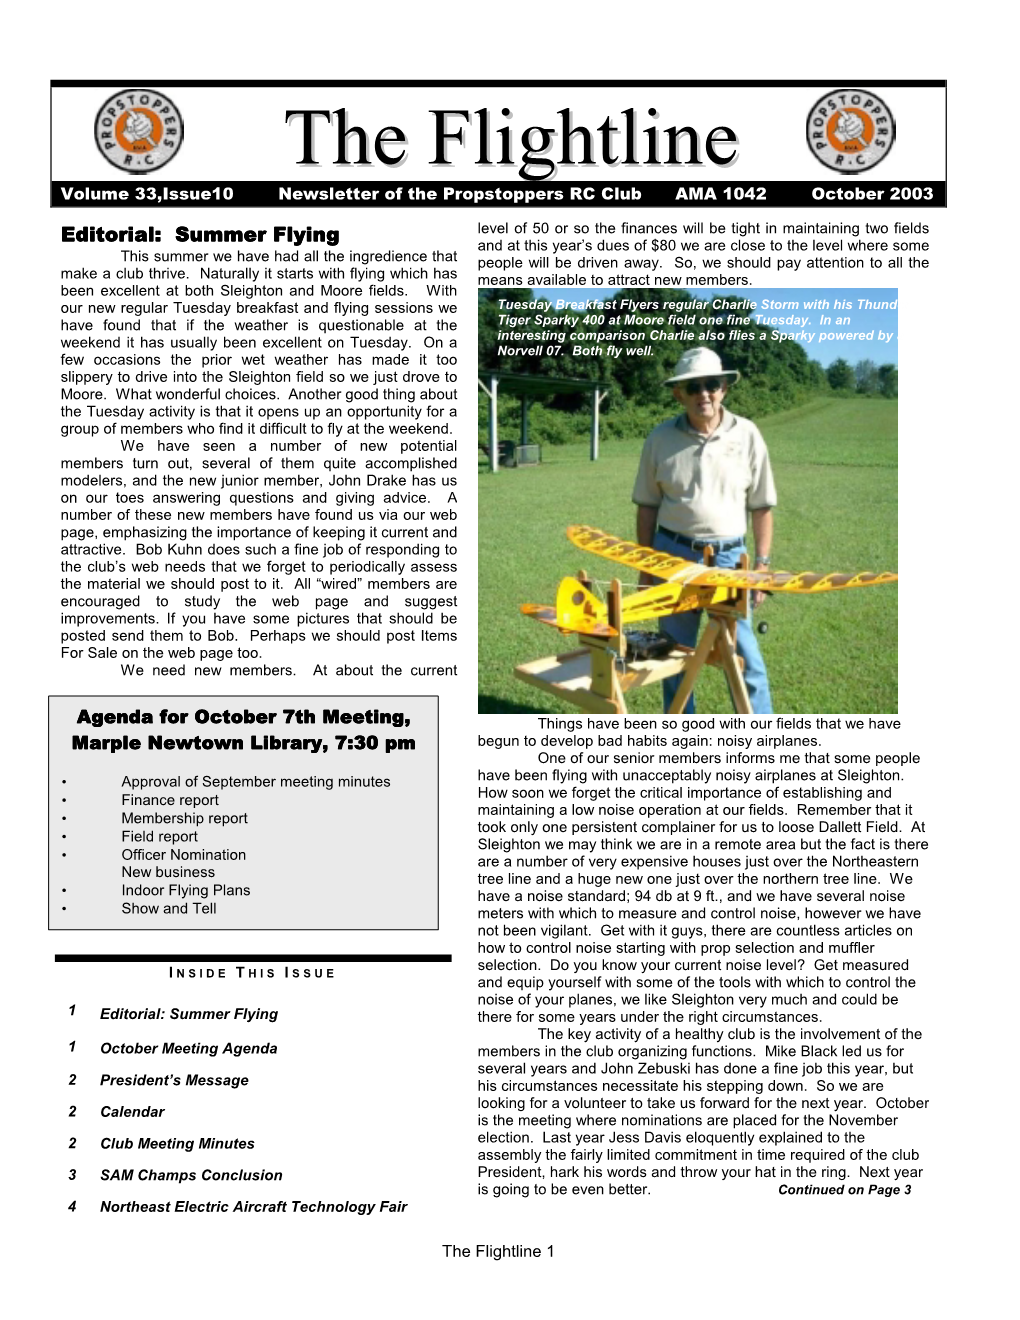 The Flightline 1 Volume 33,Issue 10 Newsletter of the Propstoppers RC Club October 2003